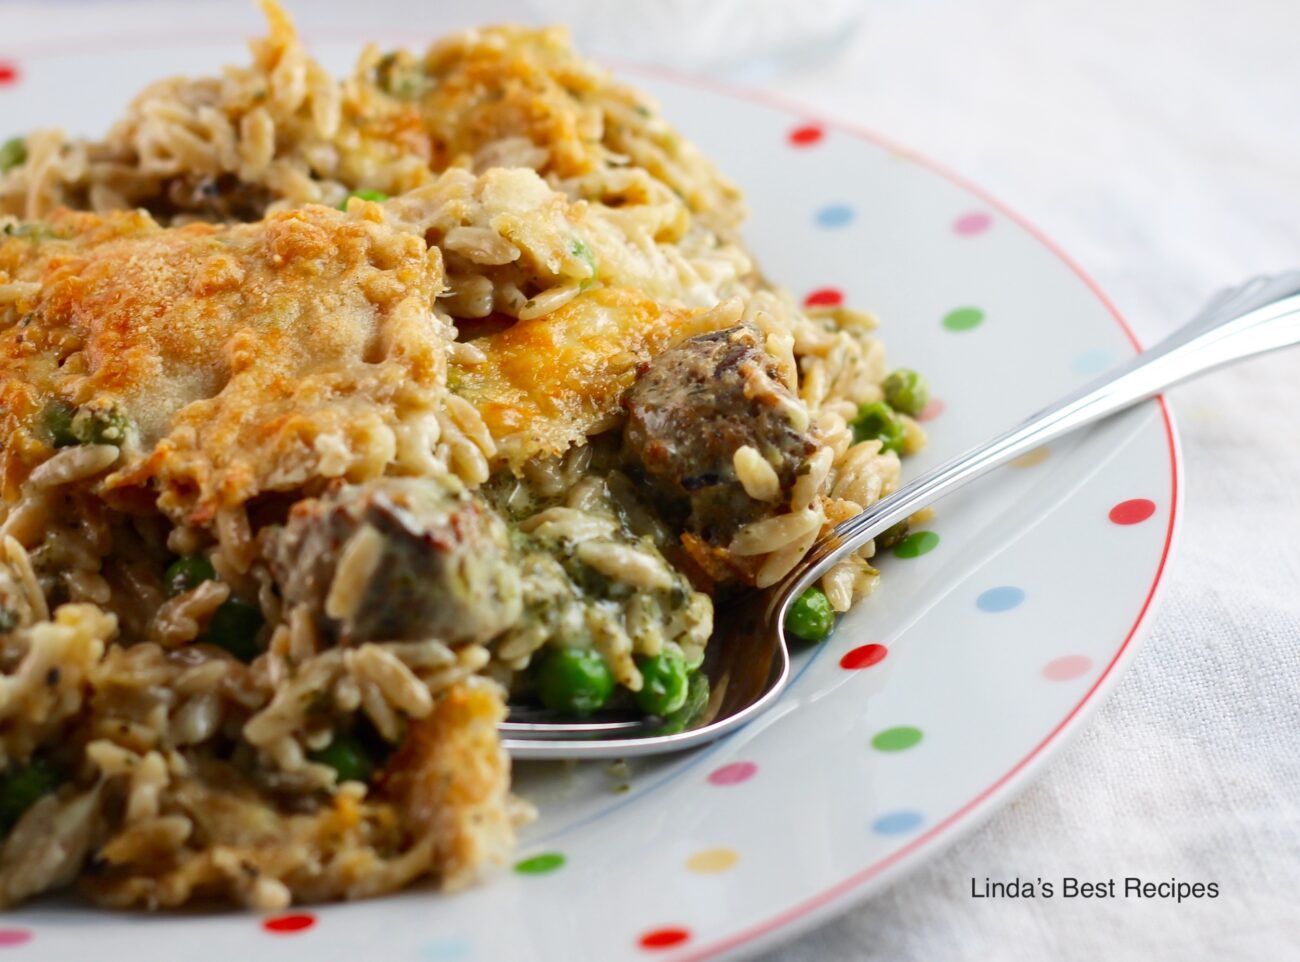 Baked Orzo with Meatballs